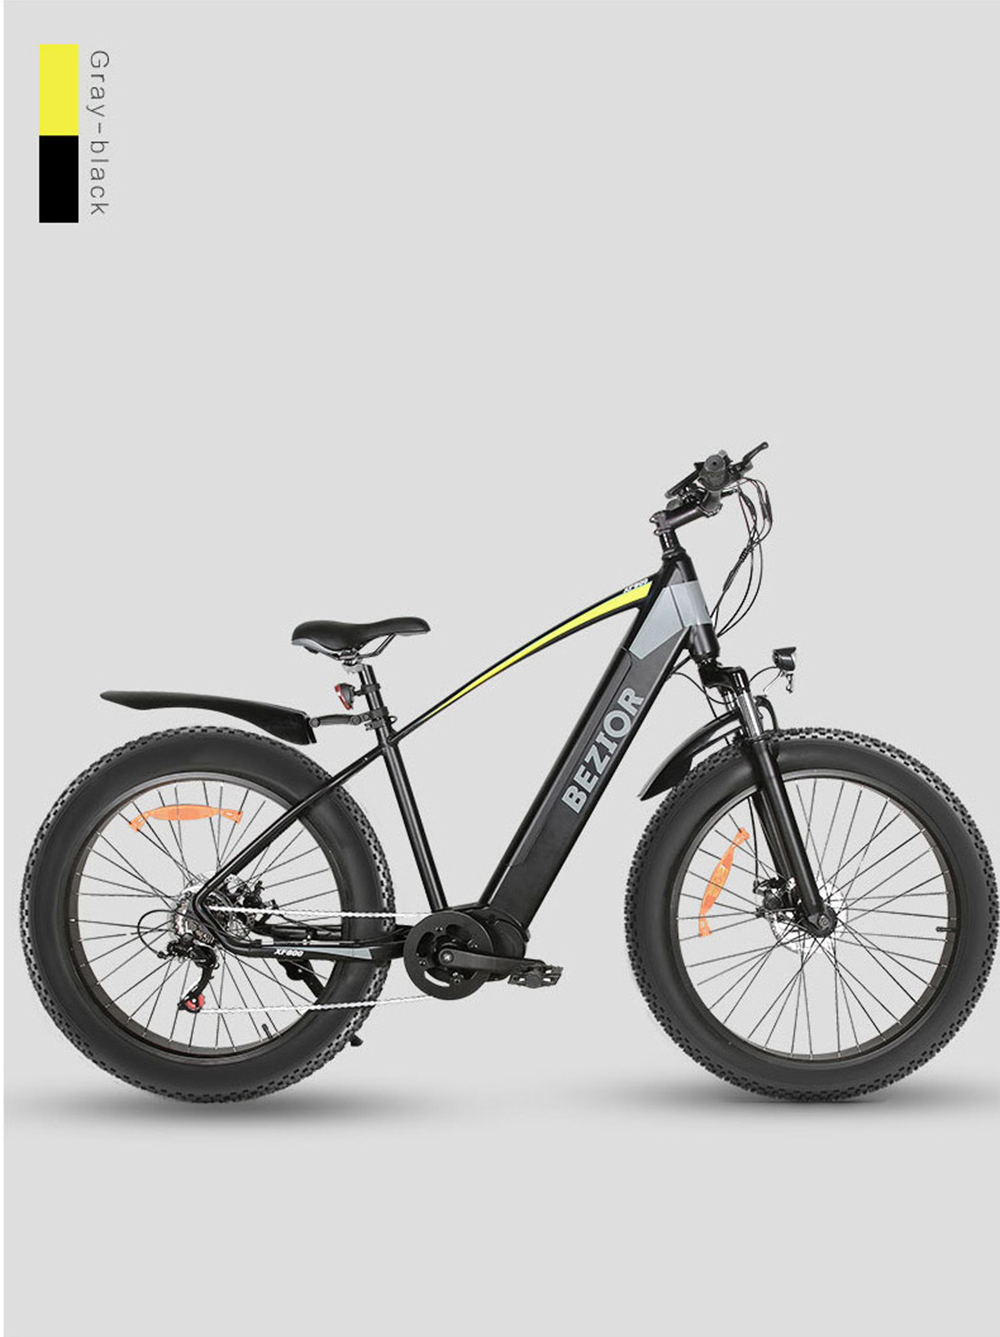 BEZIOR XF800 13Ah 48V 500W MID MOTOR Electric Bicycle 26inch 40km/h Max speed Max Load 90KG